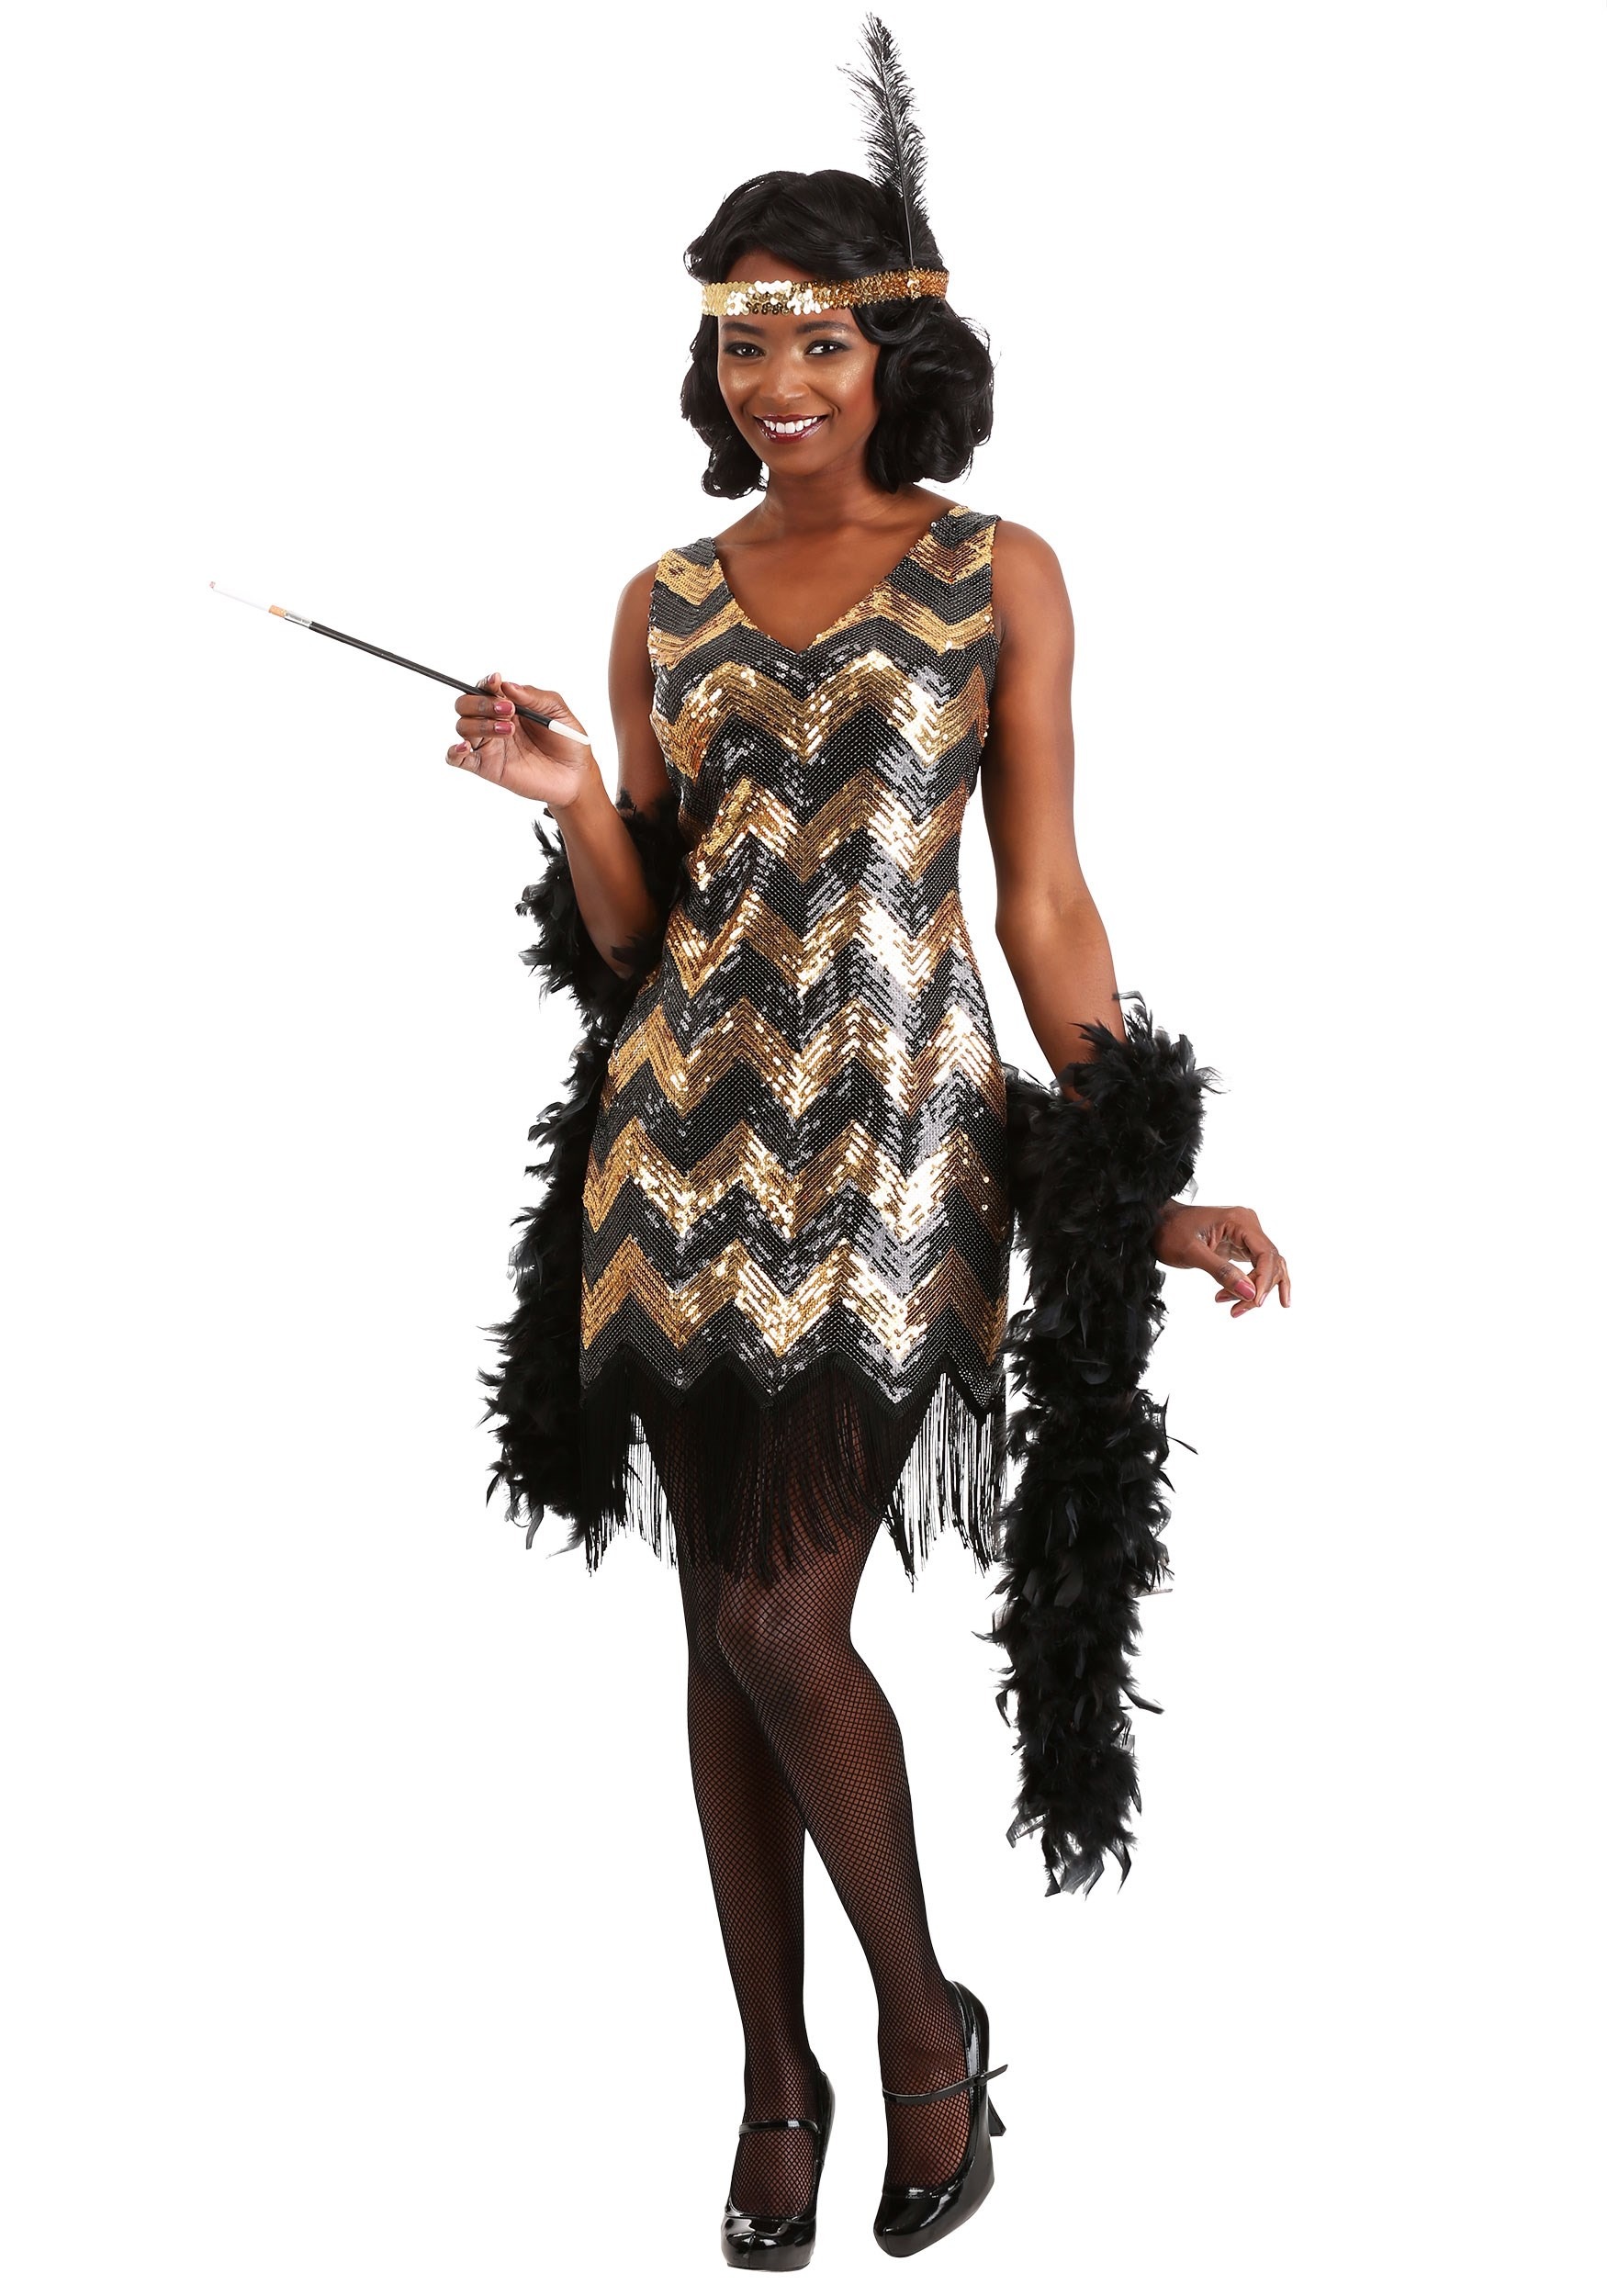 https://images.fun.com/products/46103/1-1/womens-dolled-up-flapper-costume-dress.jpg